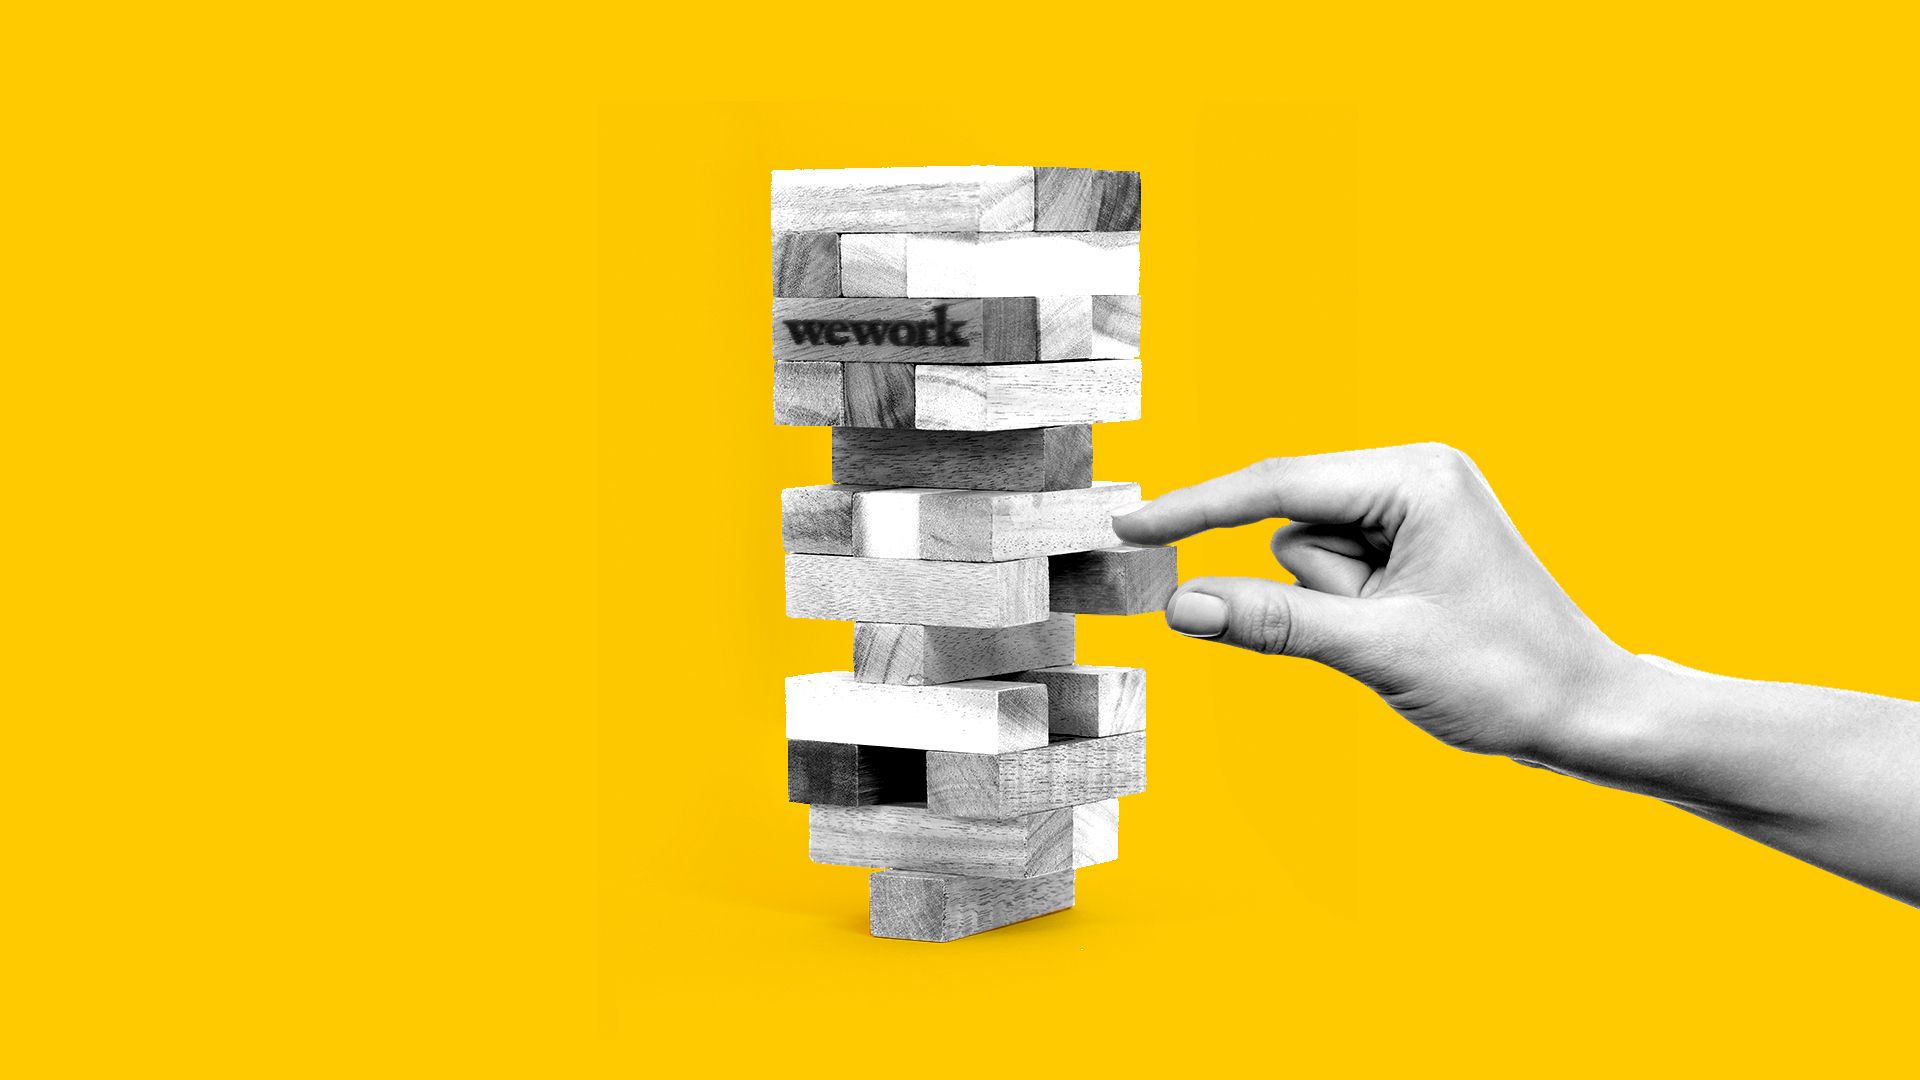 In this illustration, the WeWork logo is on a Jenga piece that balances precariously as someone removes a Jenga block underneath it.